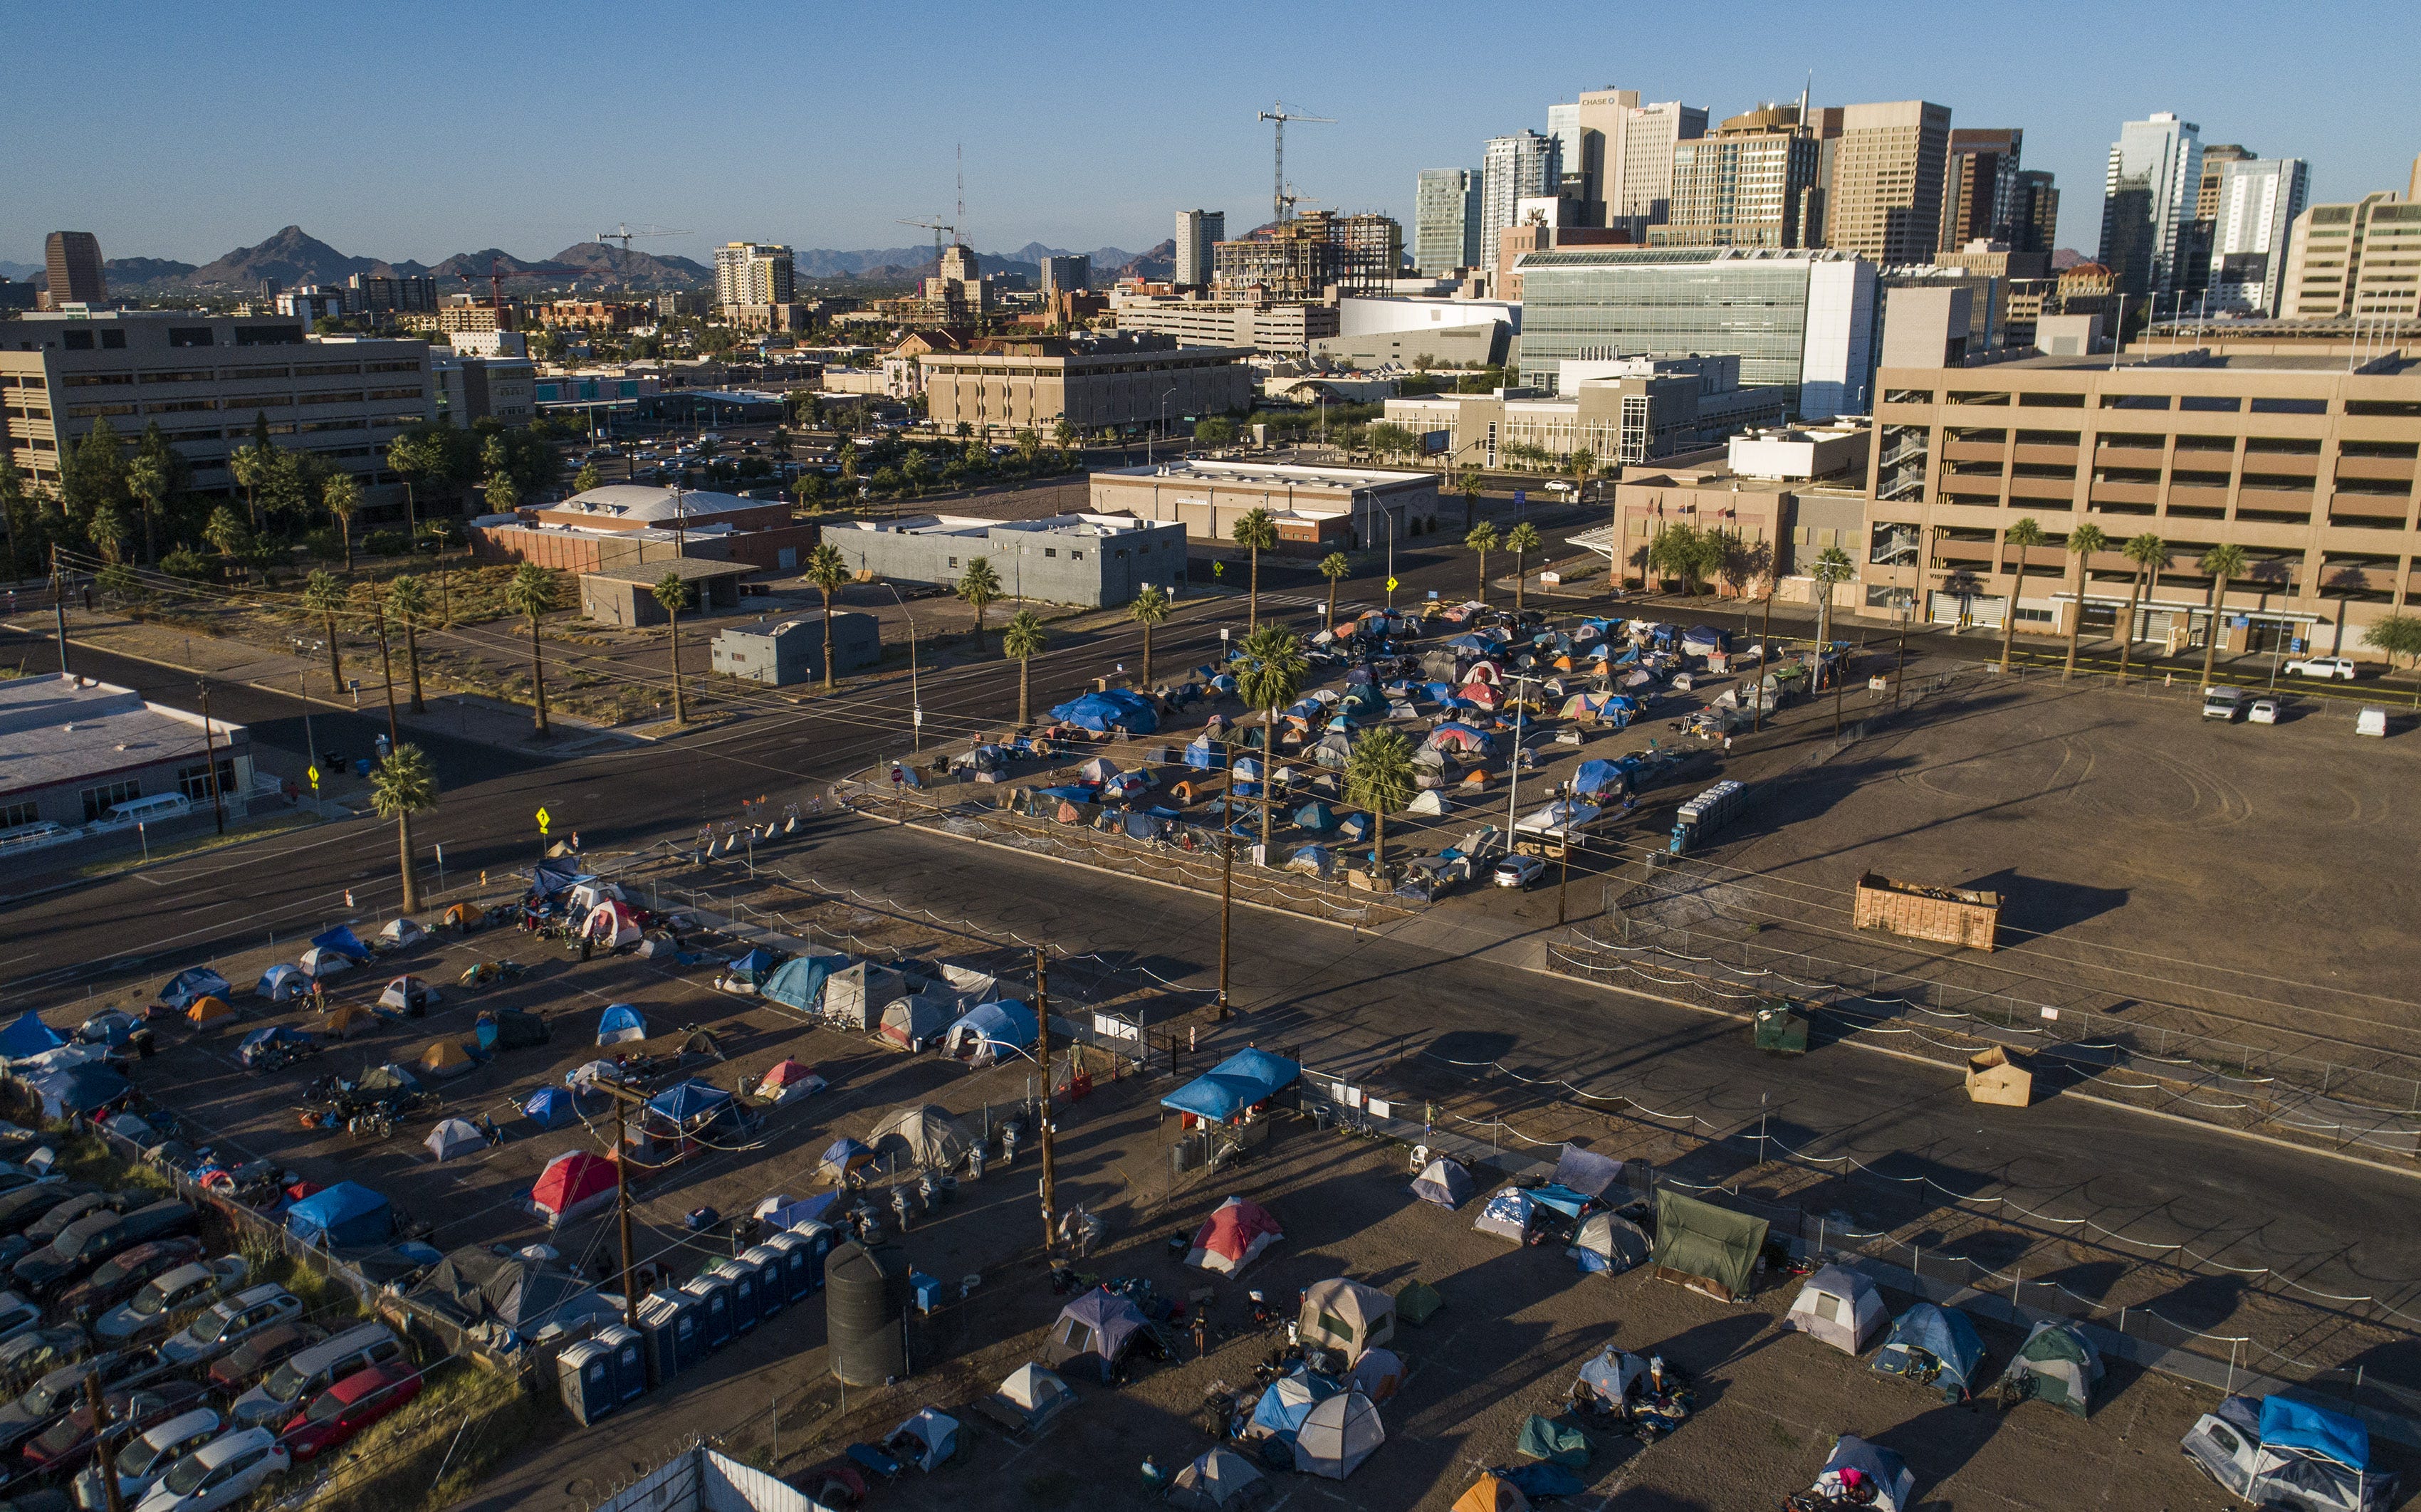 Downtown Phoenix Homeless Shelter Wants To Add 500 Beds